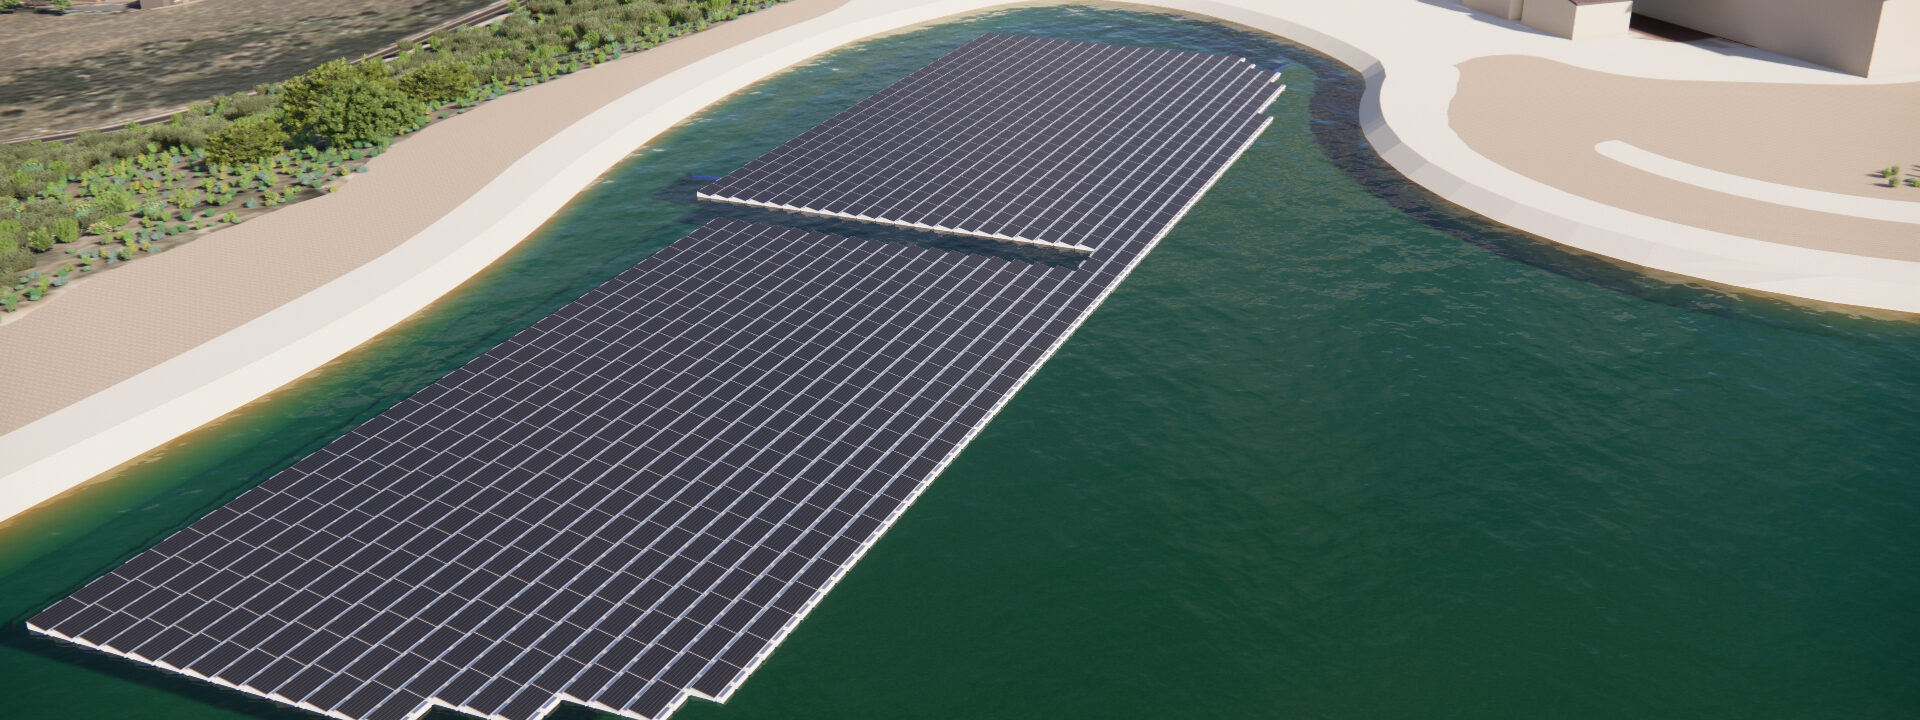 Floating solar installation planned for Utah water treatment plant